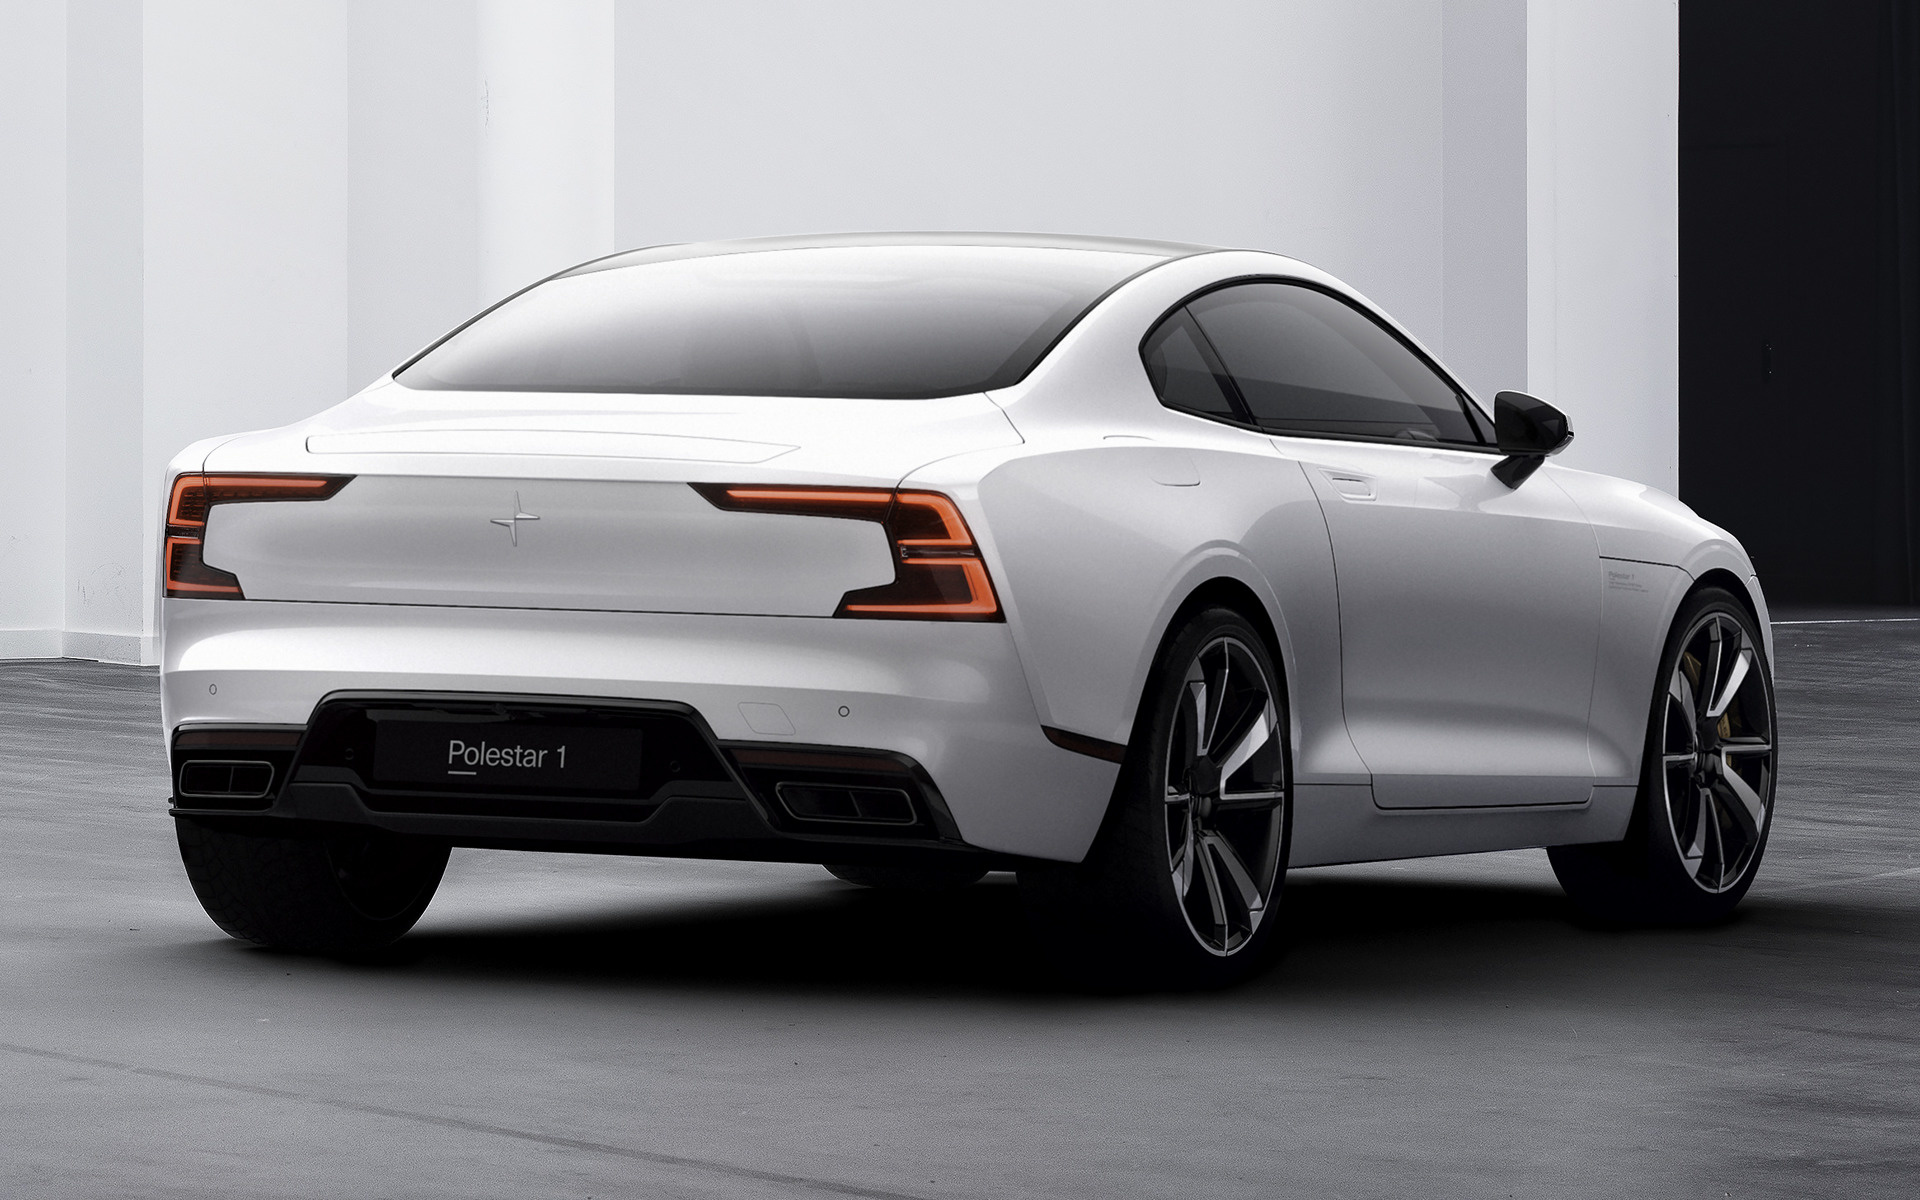 2019 Polestar 1 - Wallpapers and HD Images | Car Pixel